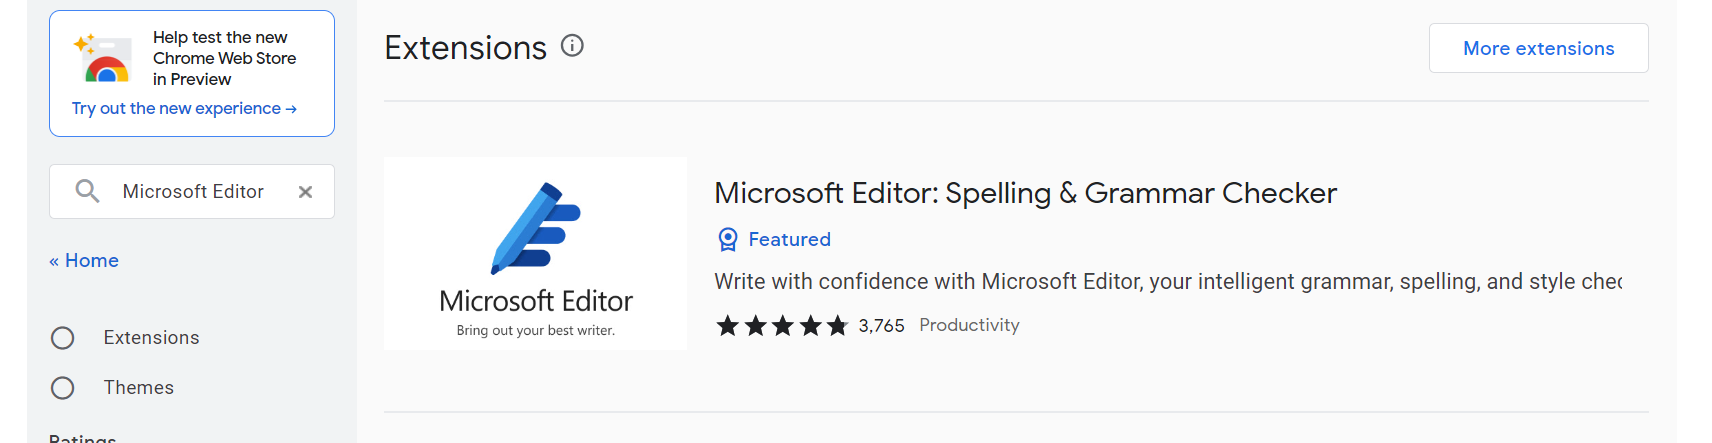 Microsoft Editor chrome application entry in the Chrome store.